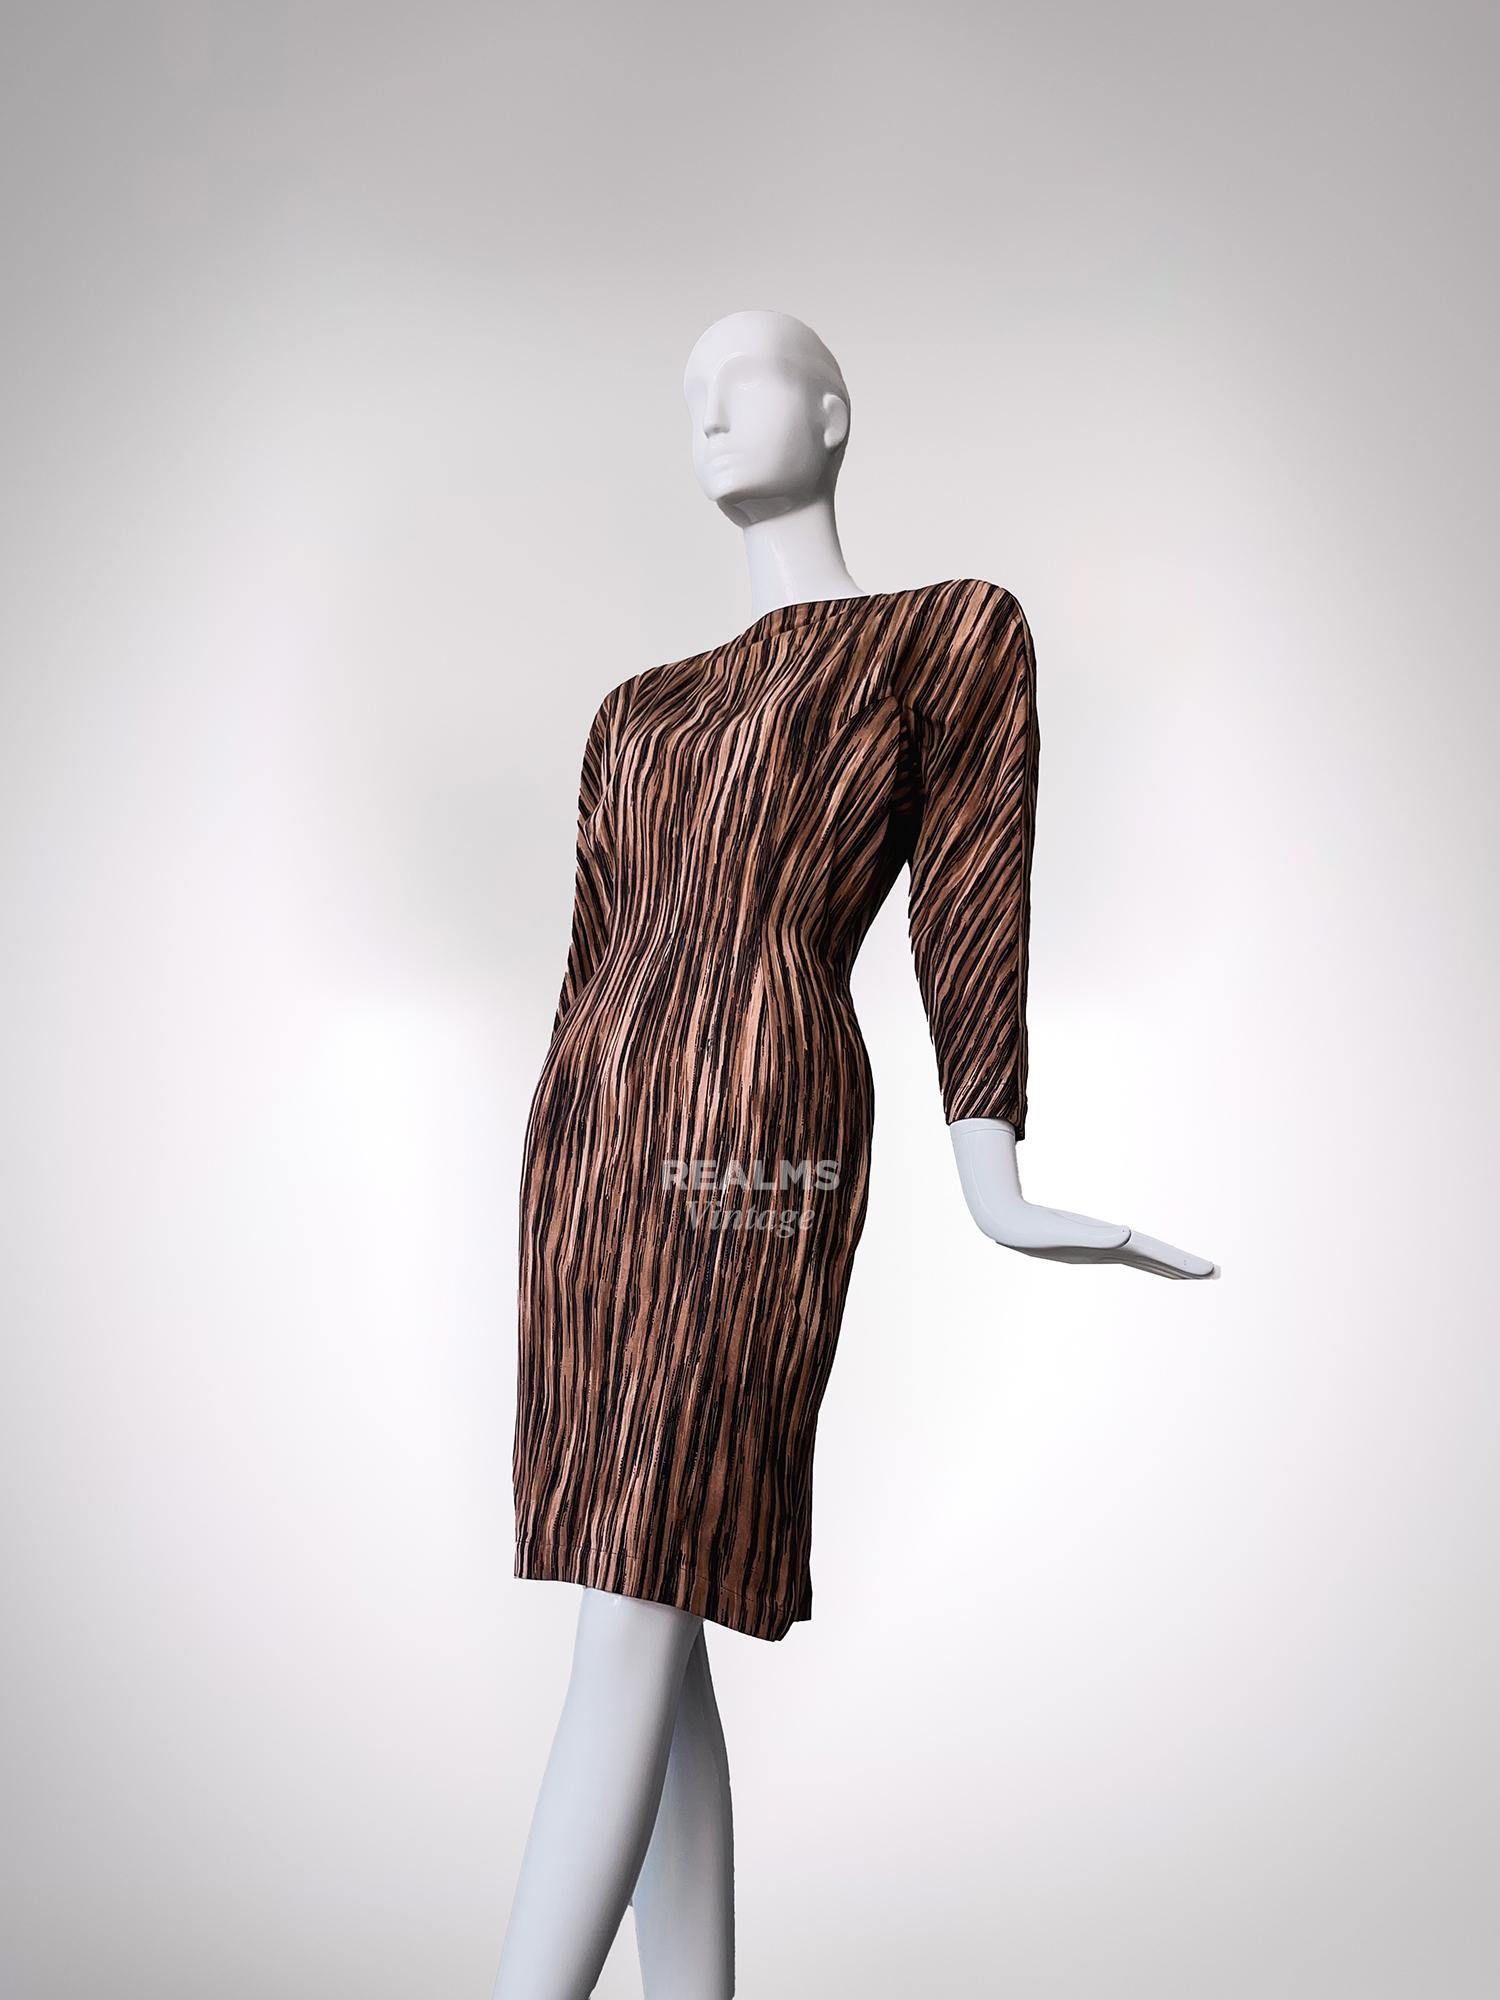 Rare Thierry Mugler SS 1988 Iconic African Collection Sculptural Dress For Sale 6